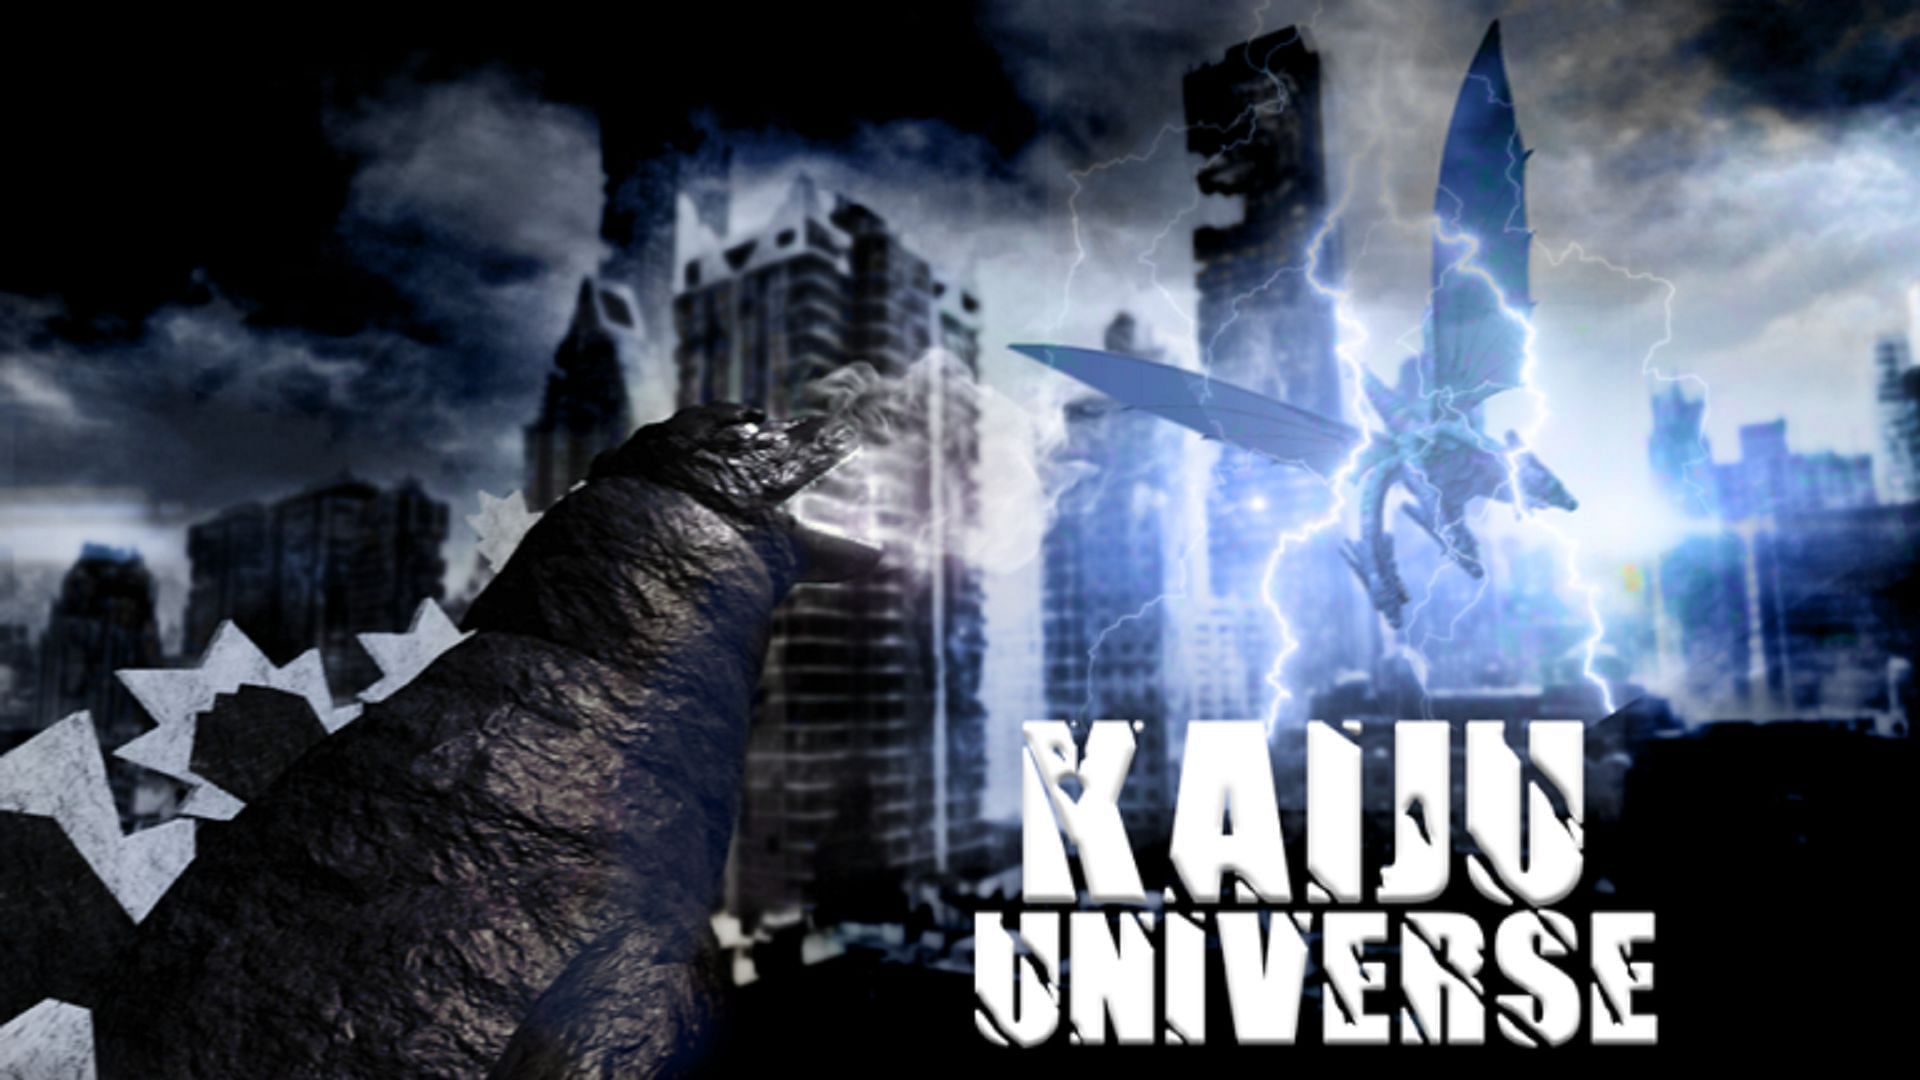 A quick method to earning G-Cells in Kaiju Universe (Image via Roblox)